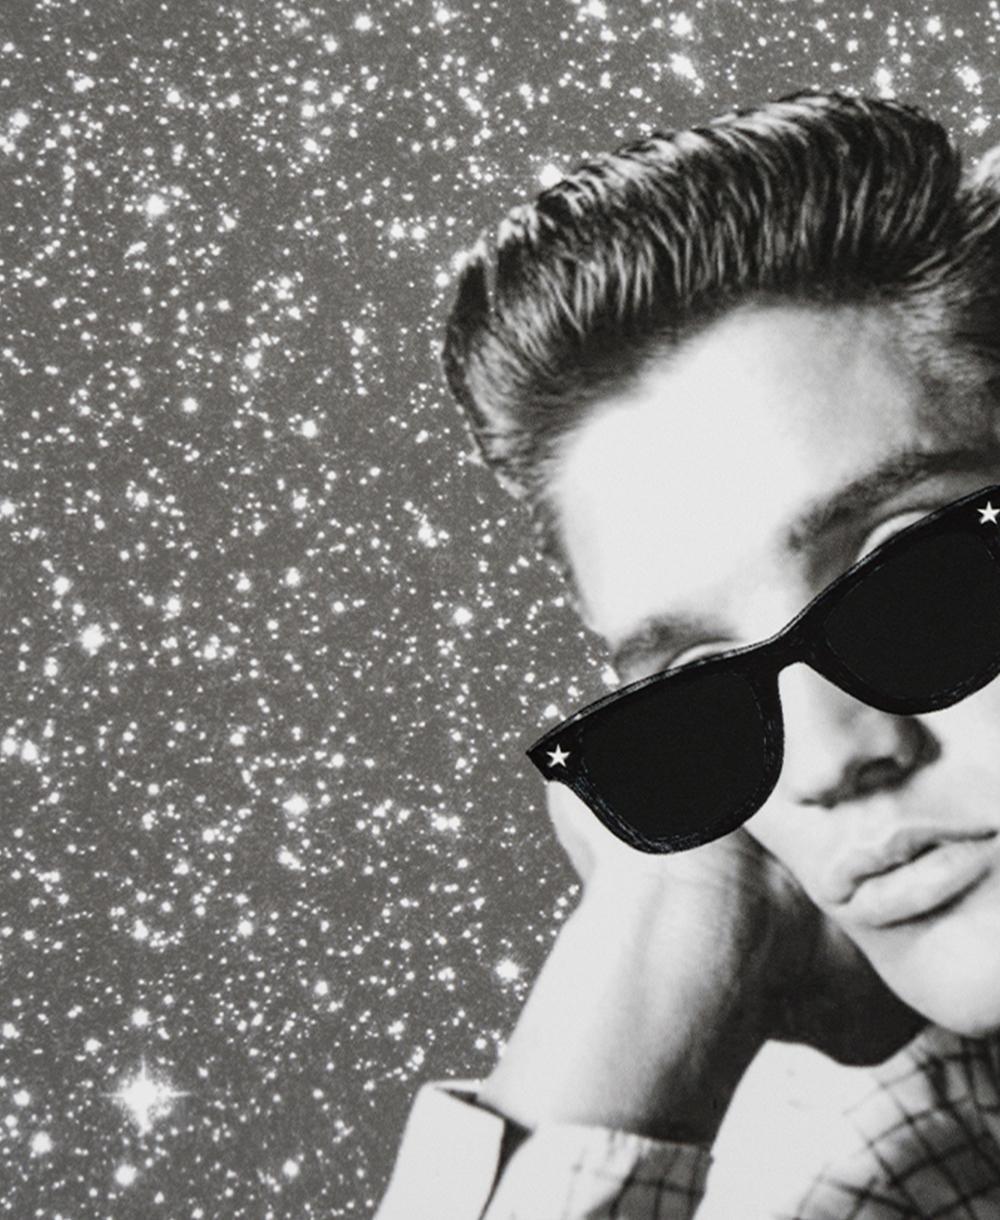 Elvis Presley, Stars, by Paloma Castello
From The Castelloland series
Digital photographs on glossy pearlescent paper
40